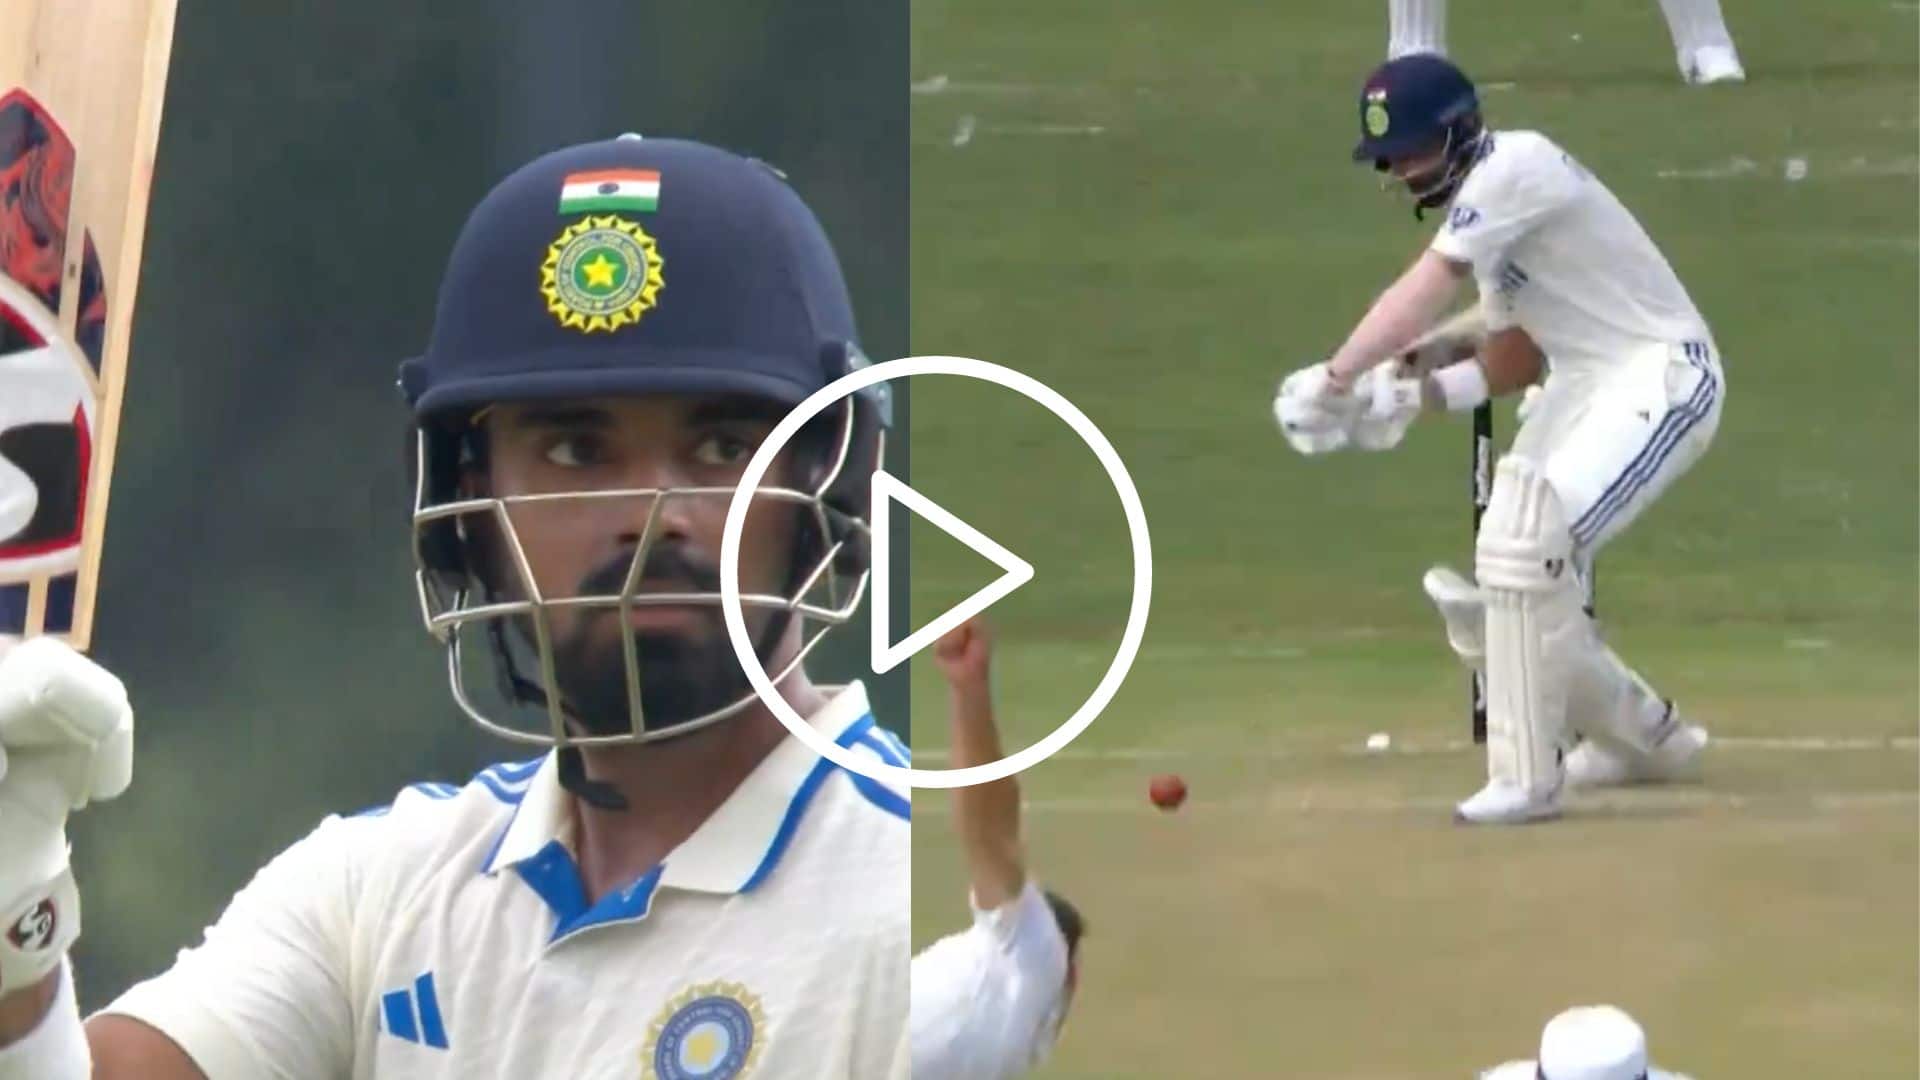 [Watch] KL Rahul Gets To His 'Fifty' With A Magnificent Six Against Nandre Burger